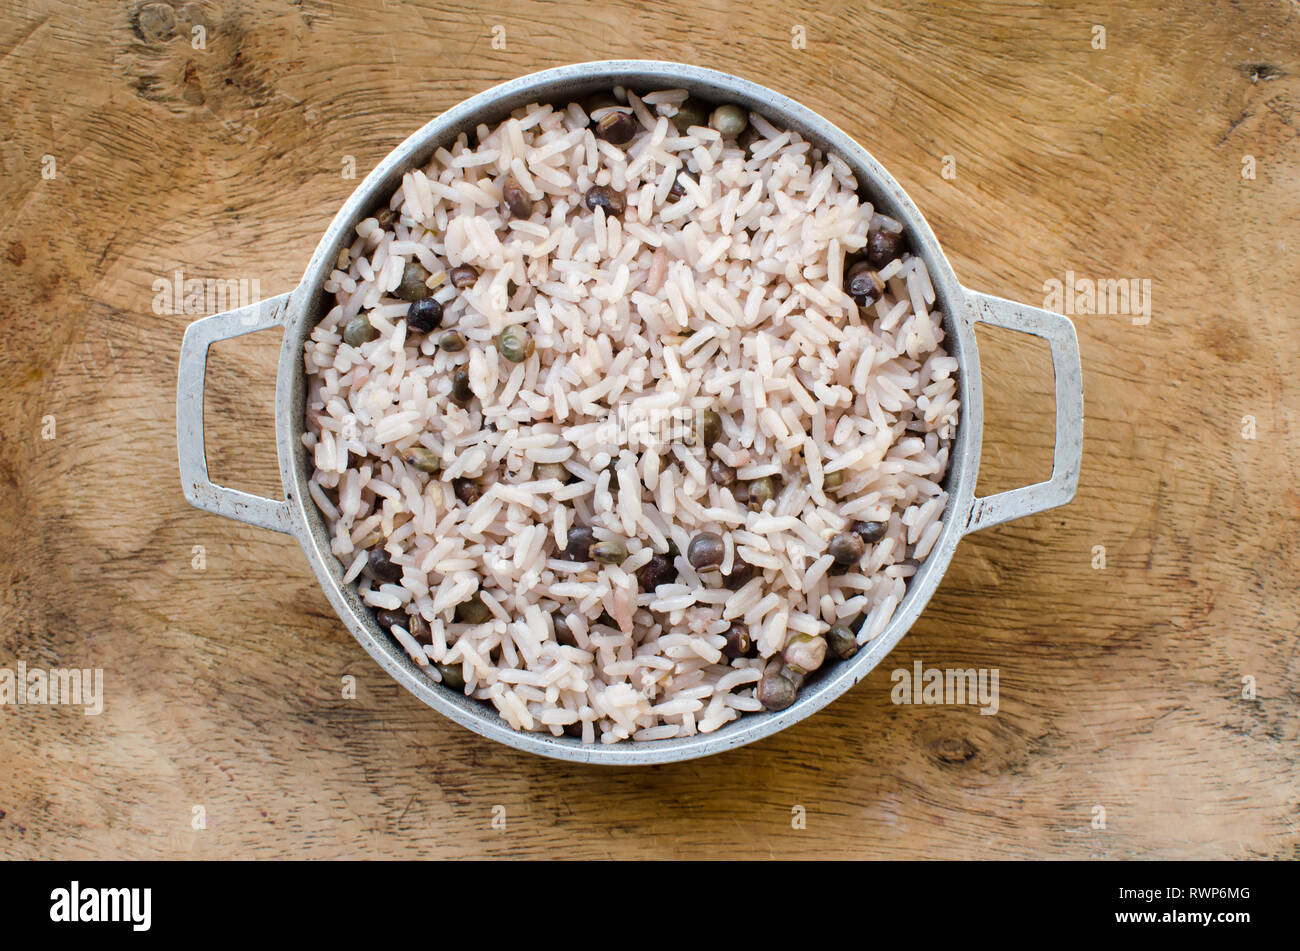 Pigeon peas rice known as “arroz con guandu” in Panama. It is one of the preferred recipes for Christmas and New Year's Eve. Stock Photo